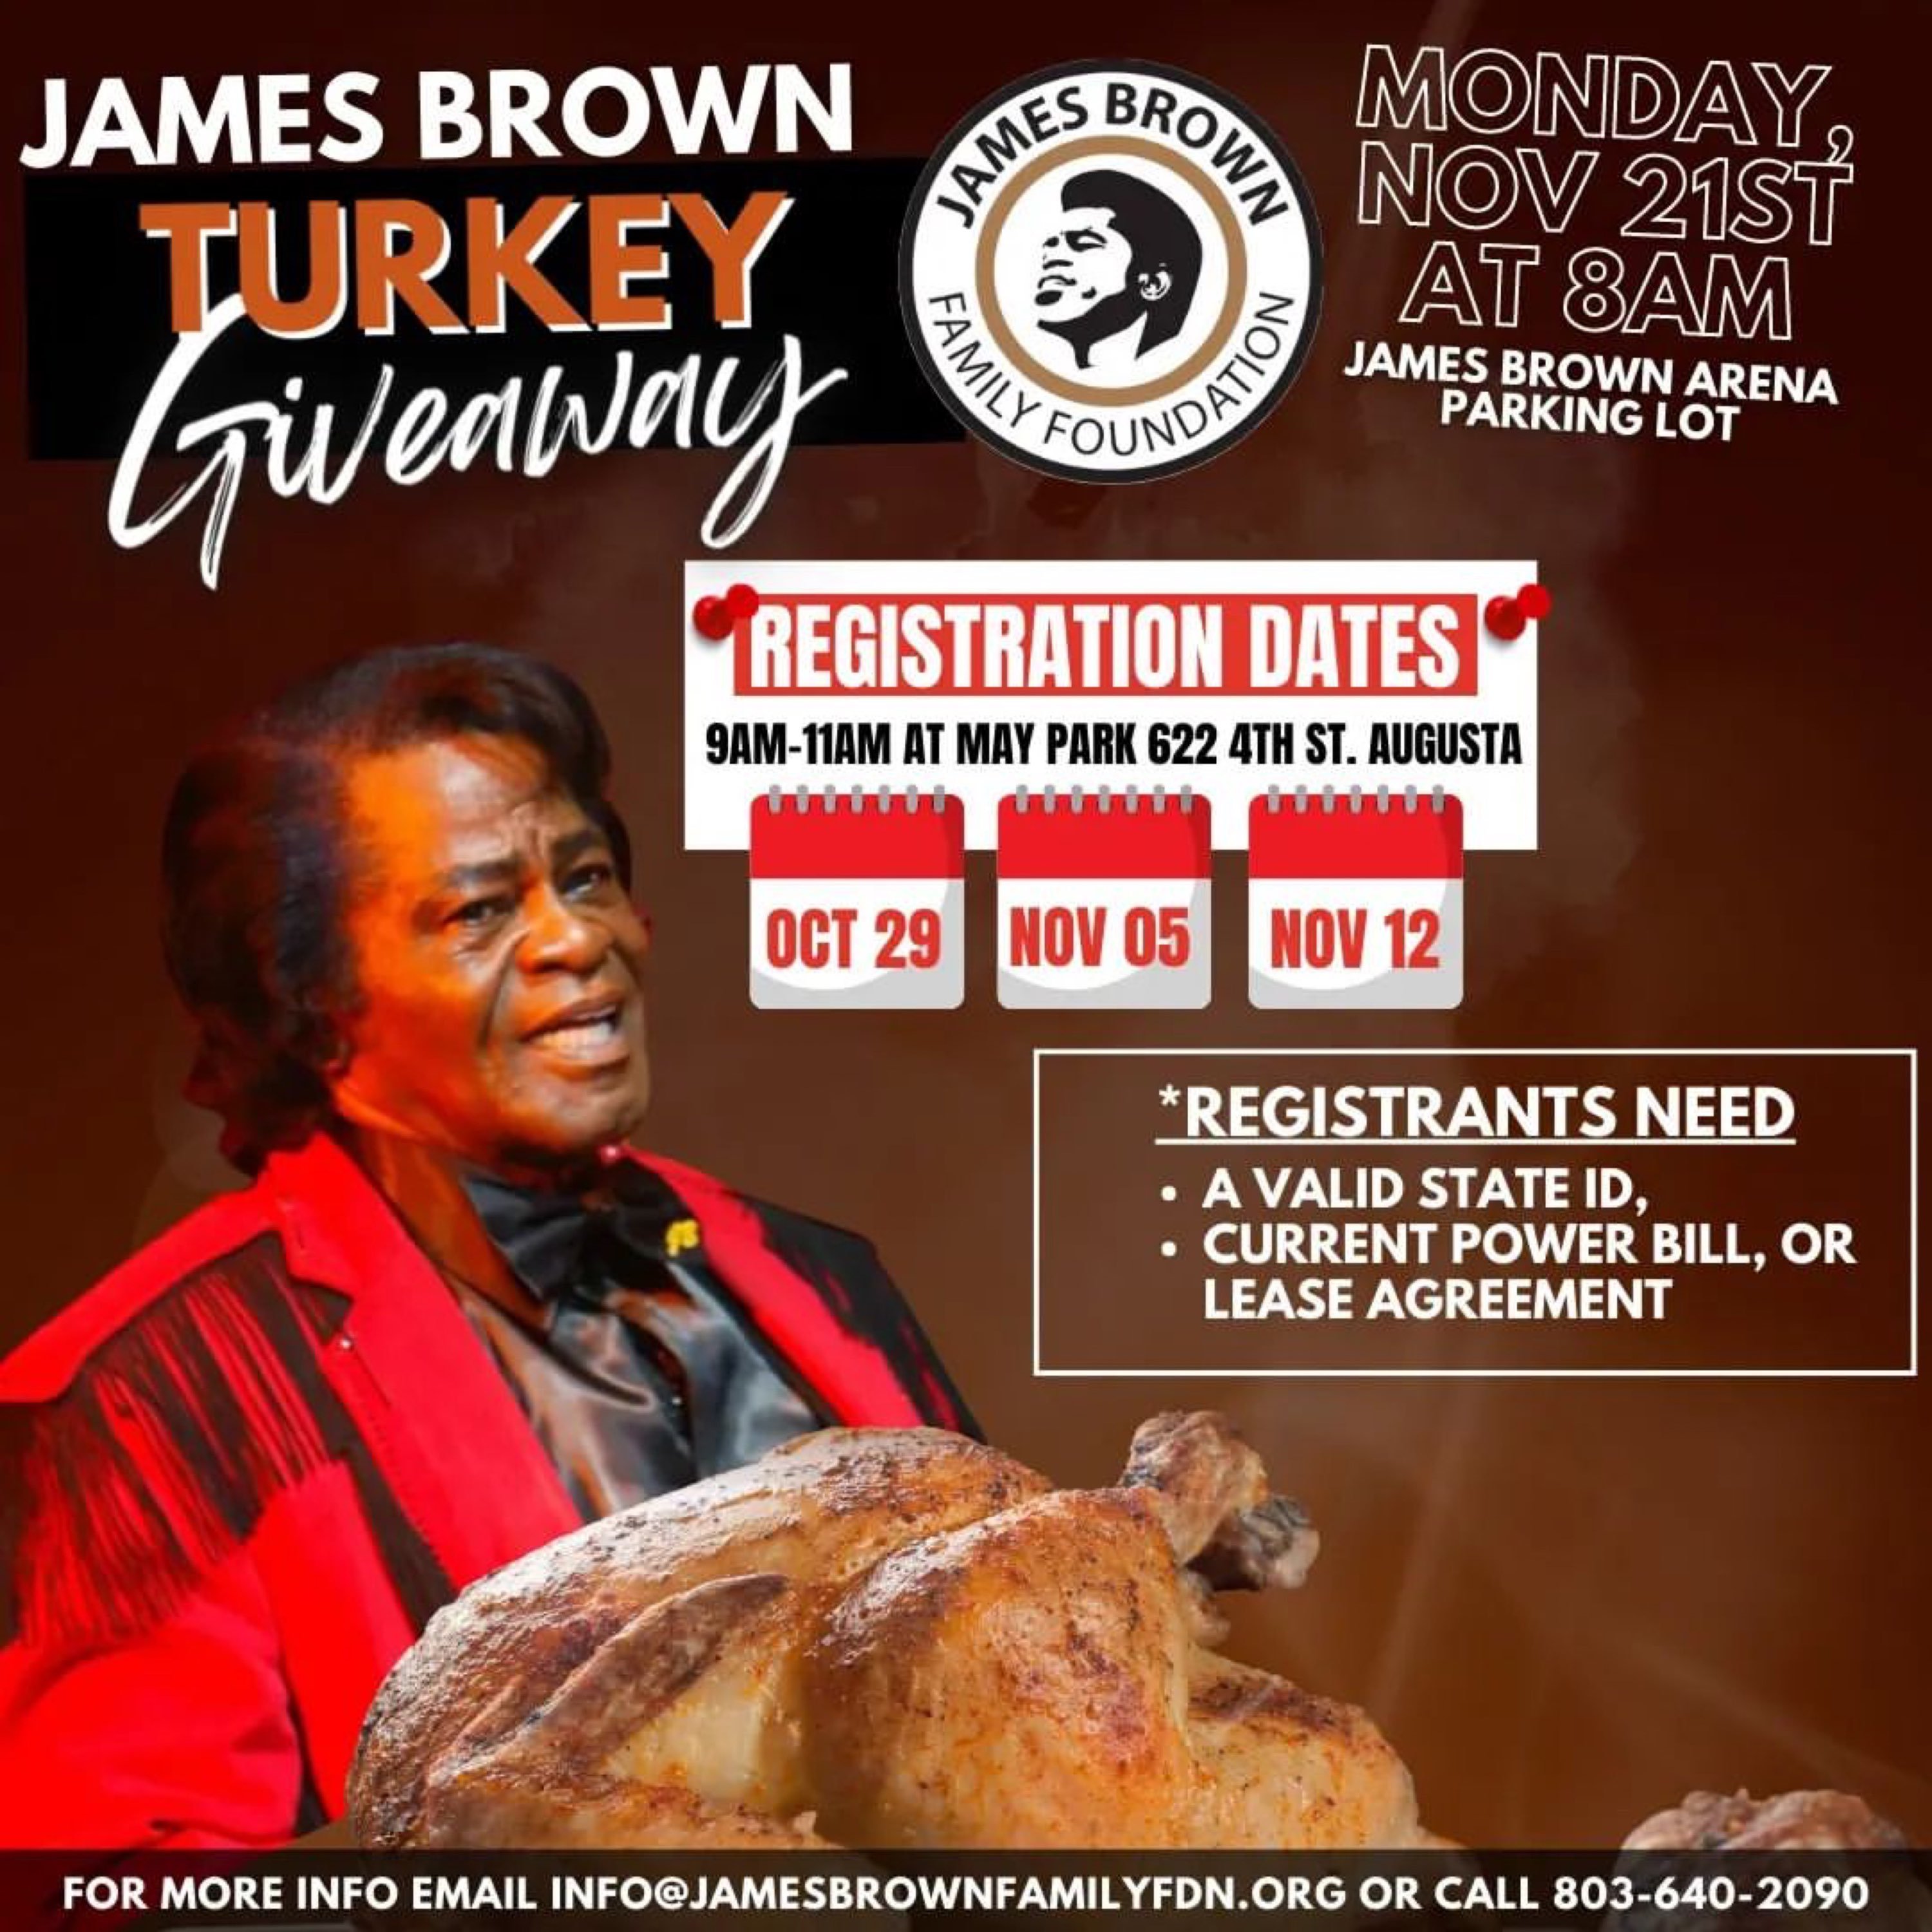 2022 James Brown Turkey Giveaway dates announced WFXG